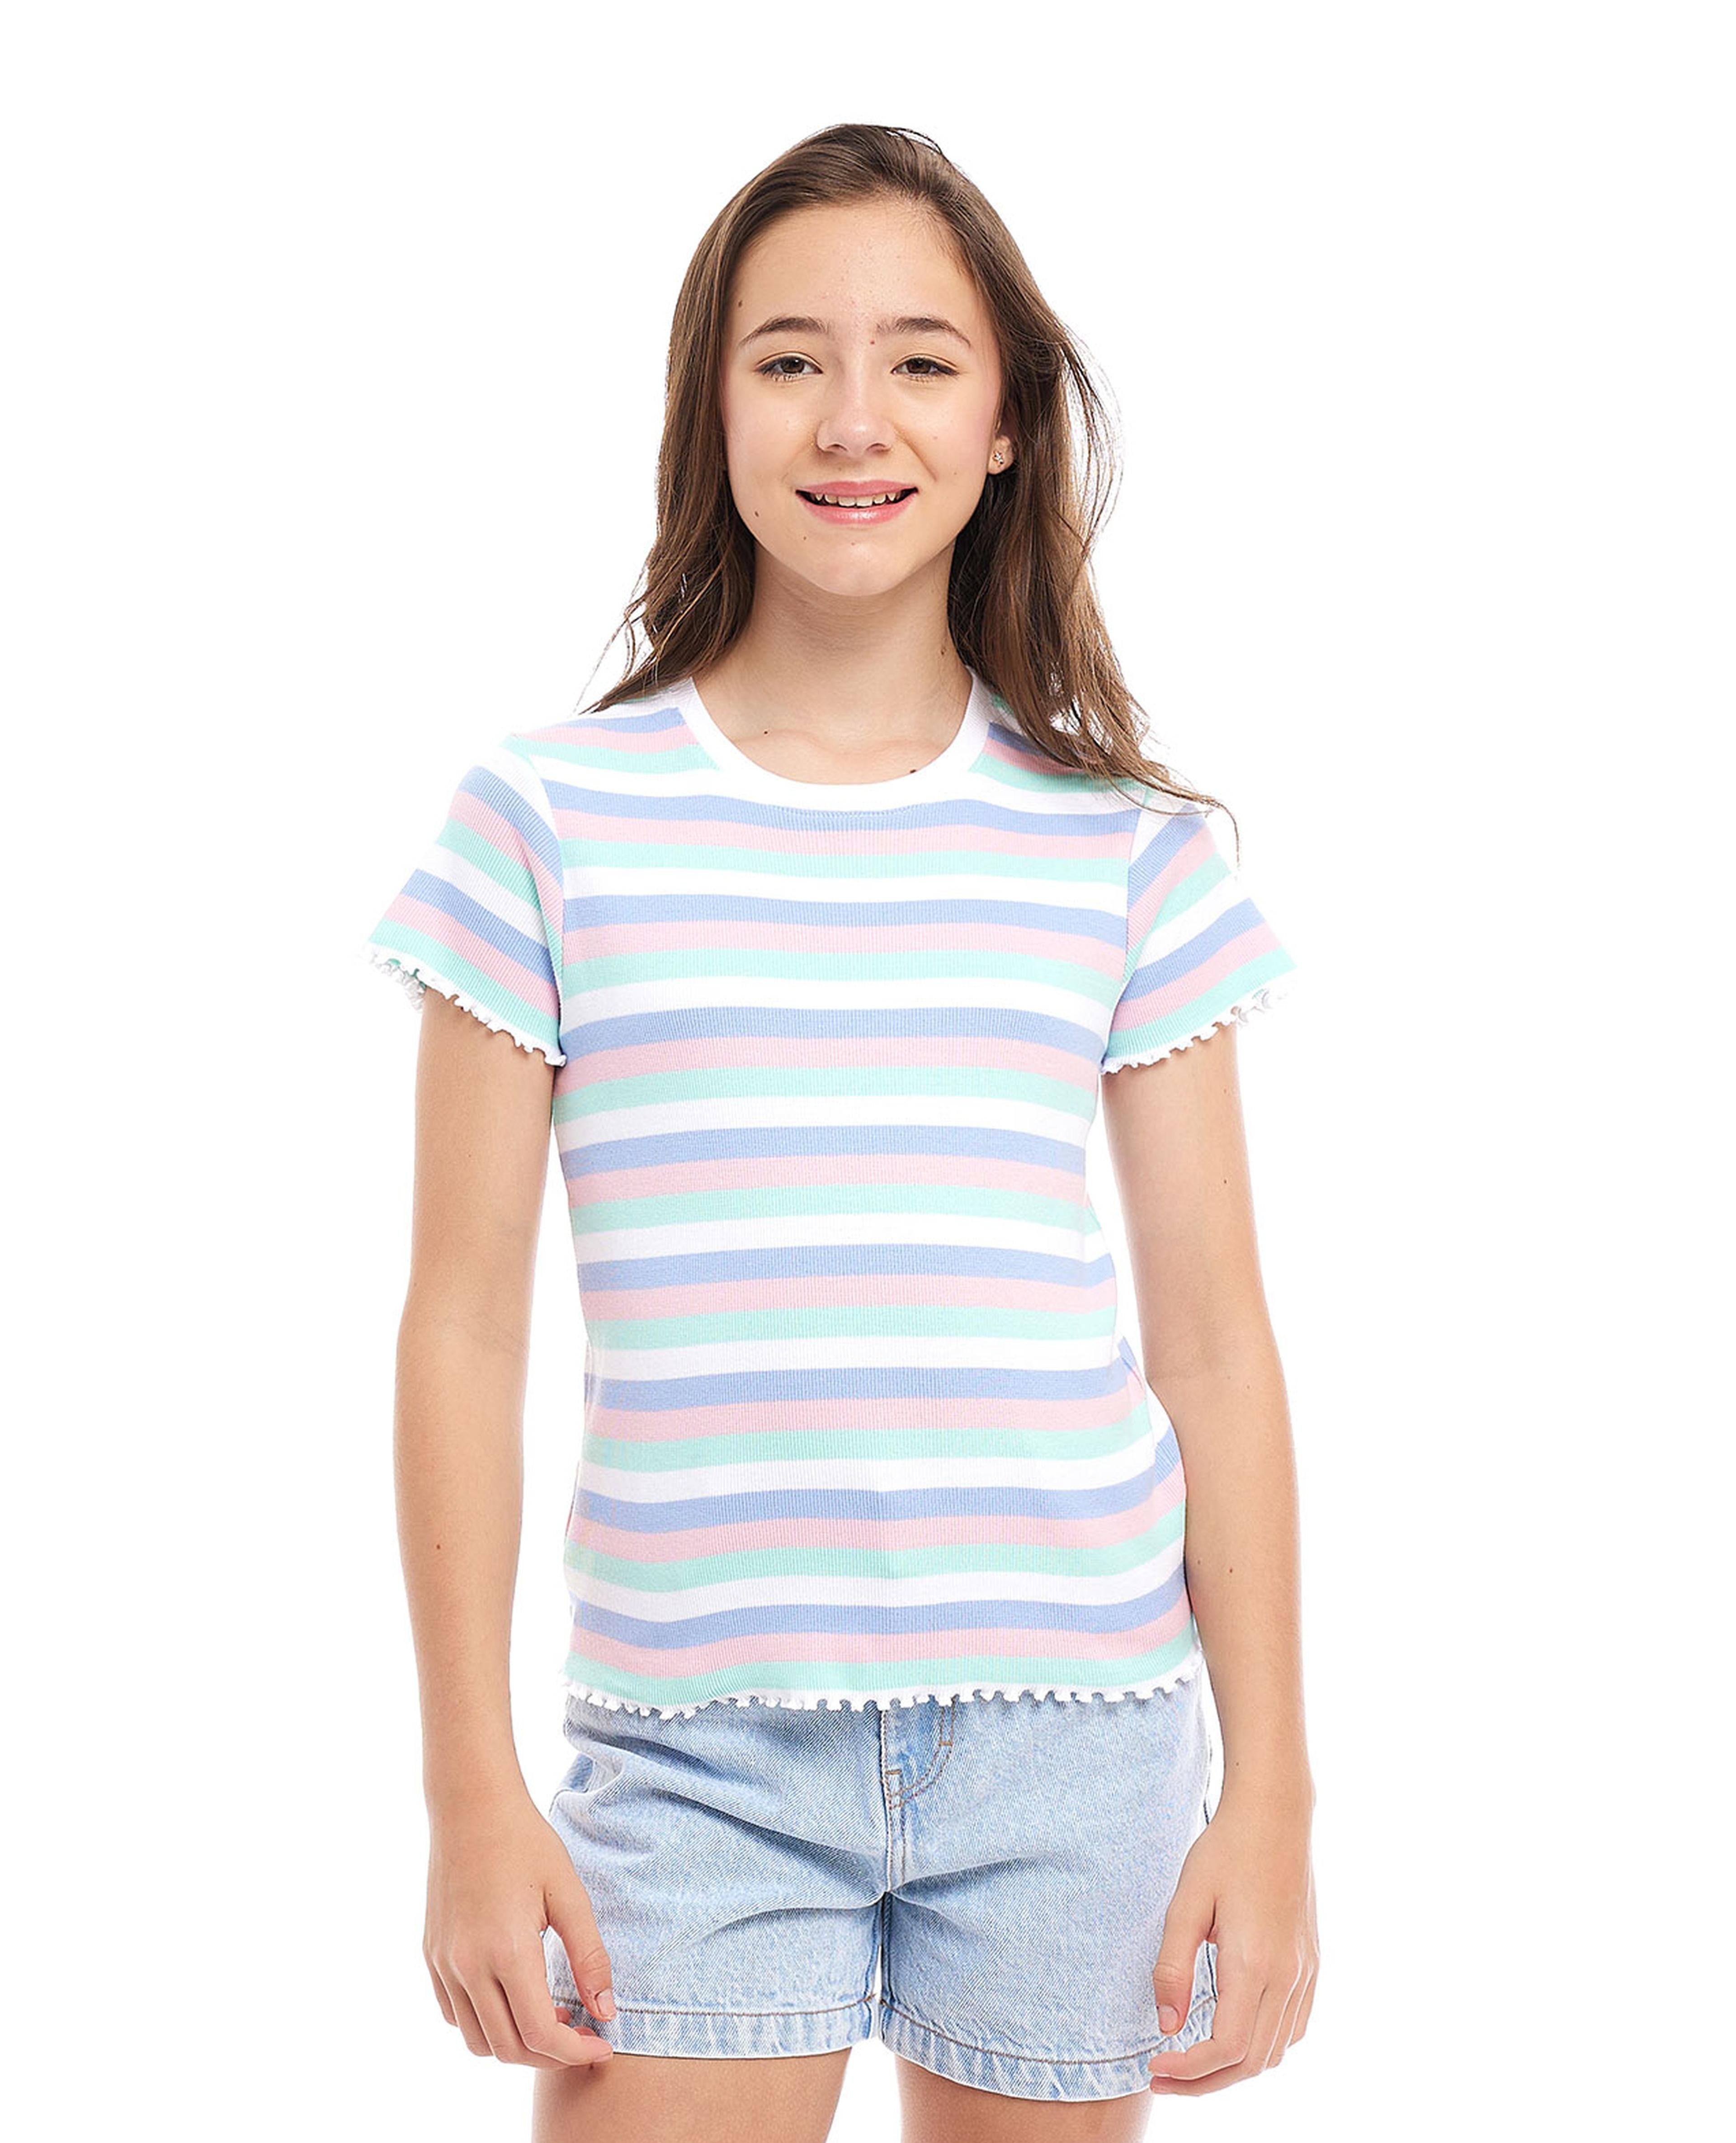 Striped Top with Crew Neck and Short Sleeves